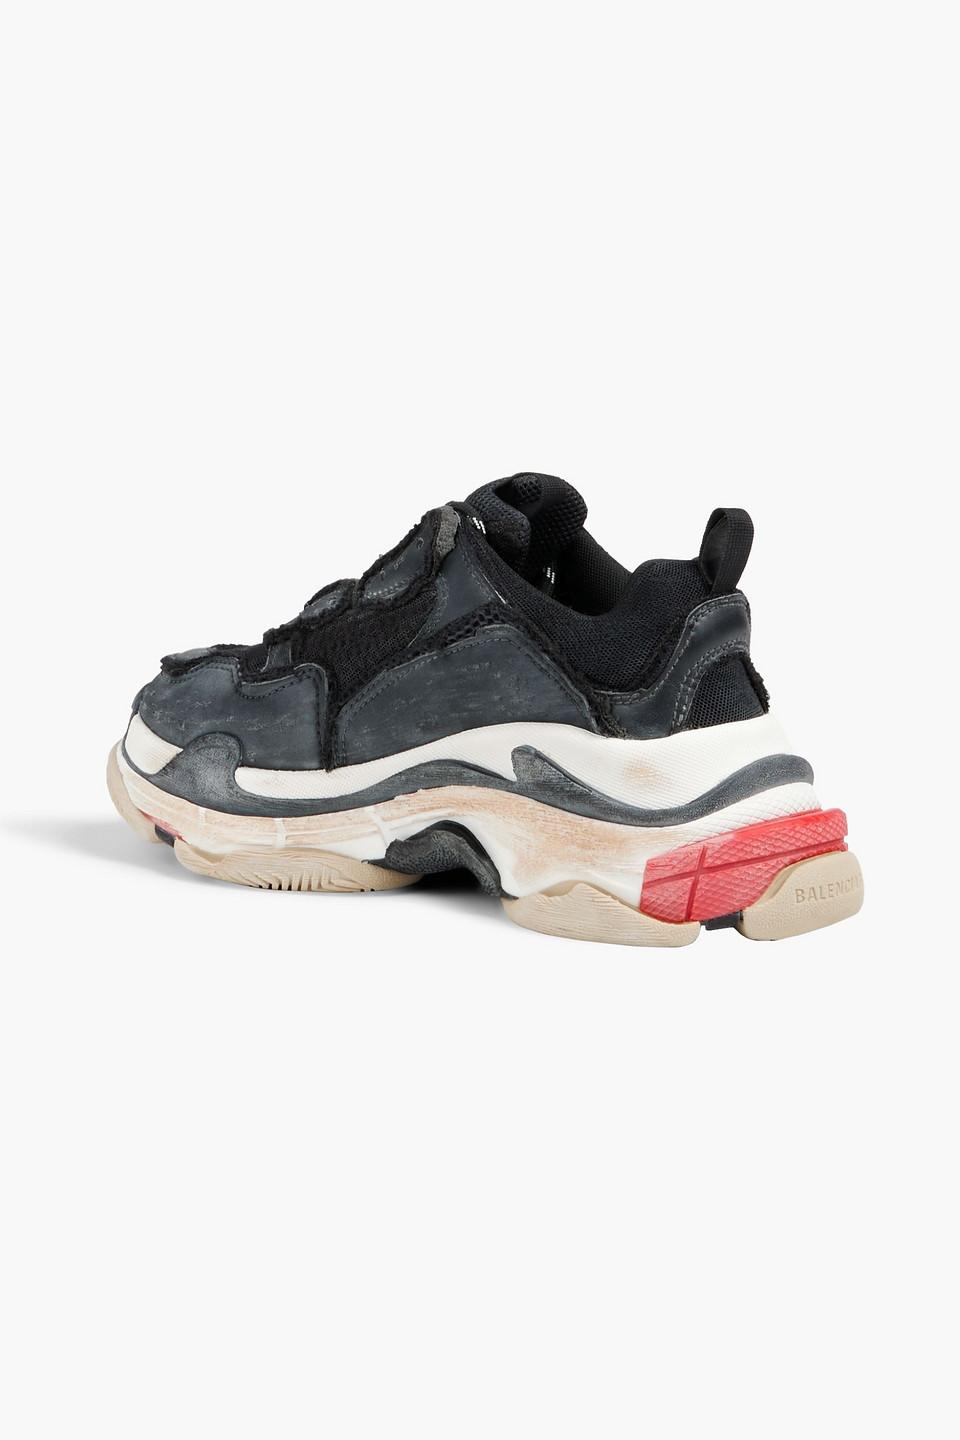 Balenciaga Triple S Distressed Leather And Mesh Sneakers in Black | Lyst